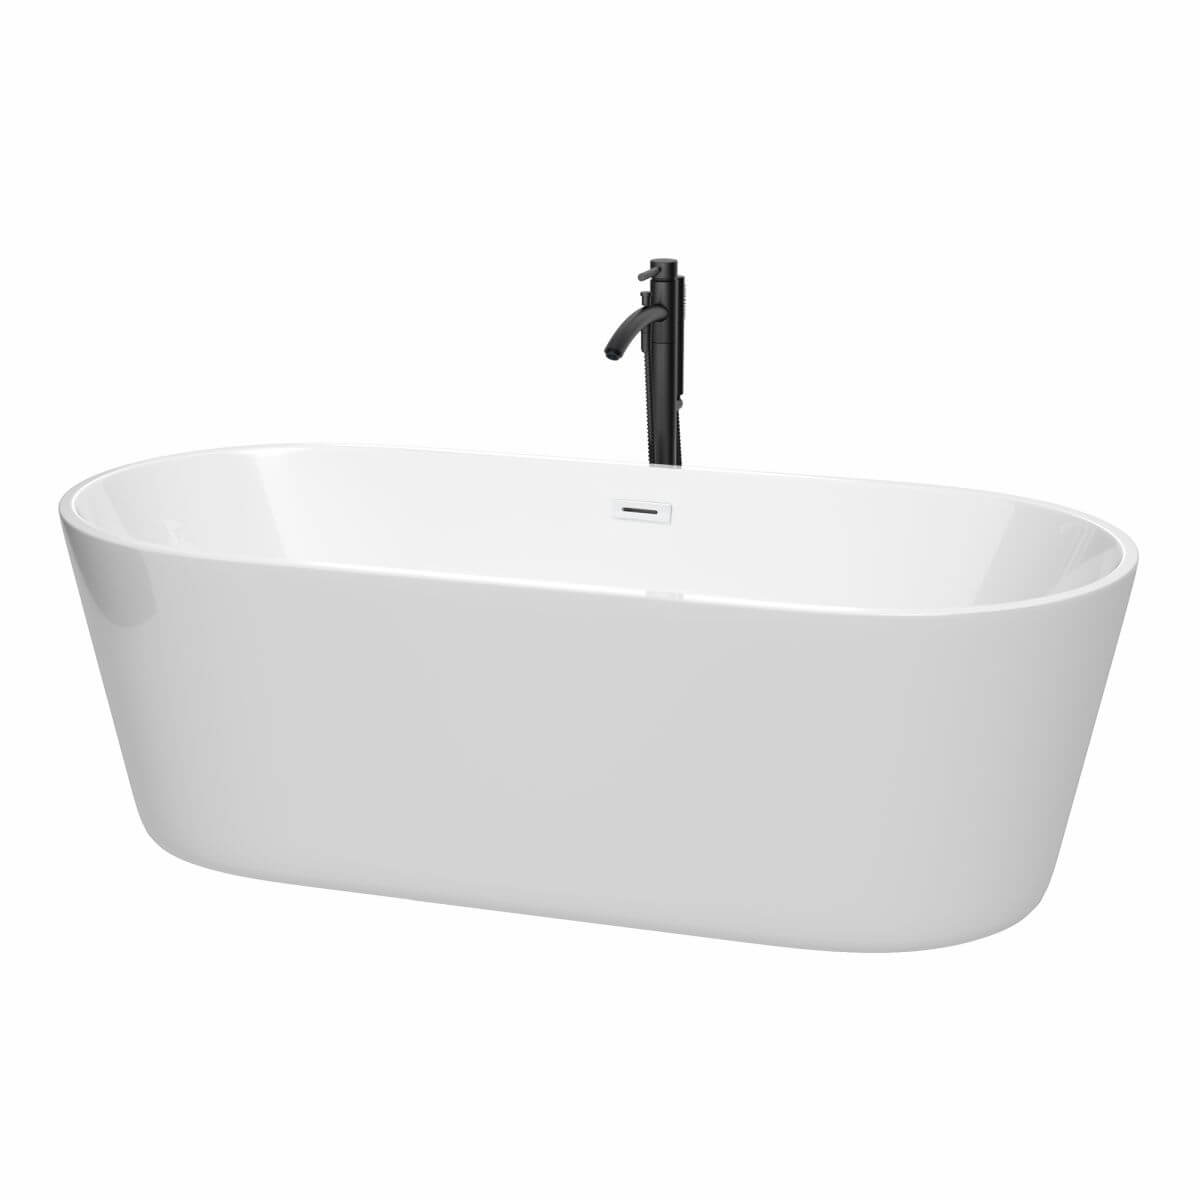 Wyndham Collection Carissa 71 inch Freestanding Bathtub in White with Shiny White Trim and Floor Mounted Faucet in Matte Black - WCOBT101271SWATPBK